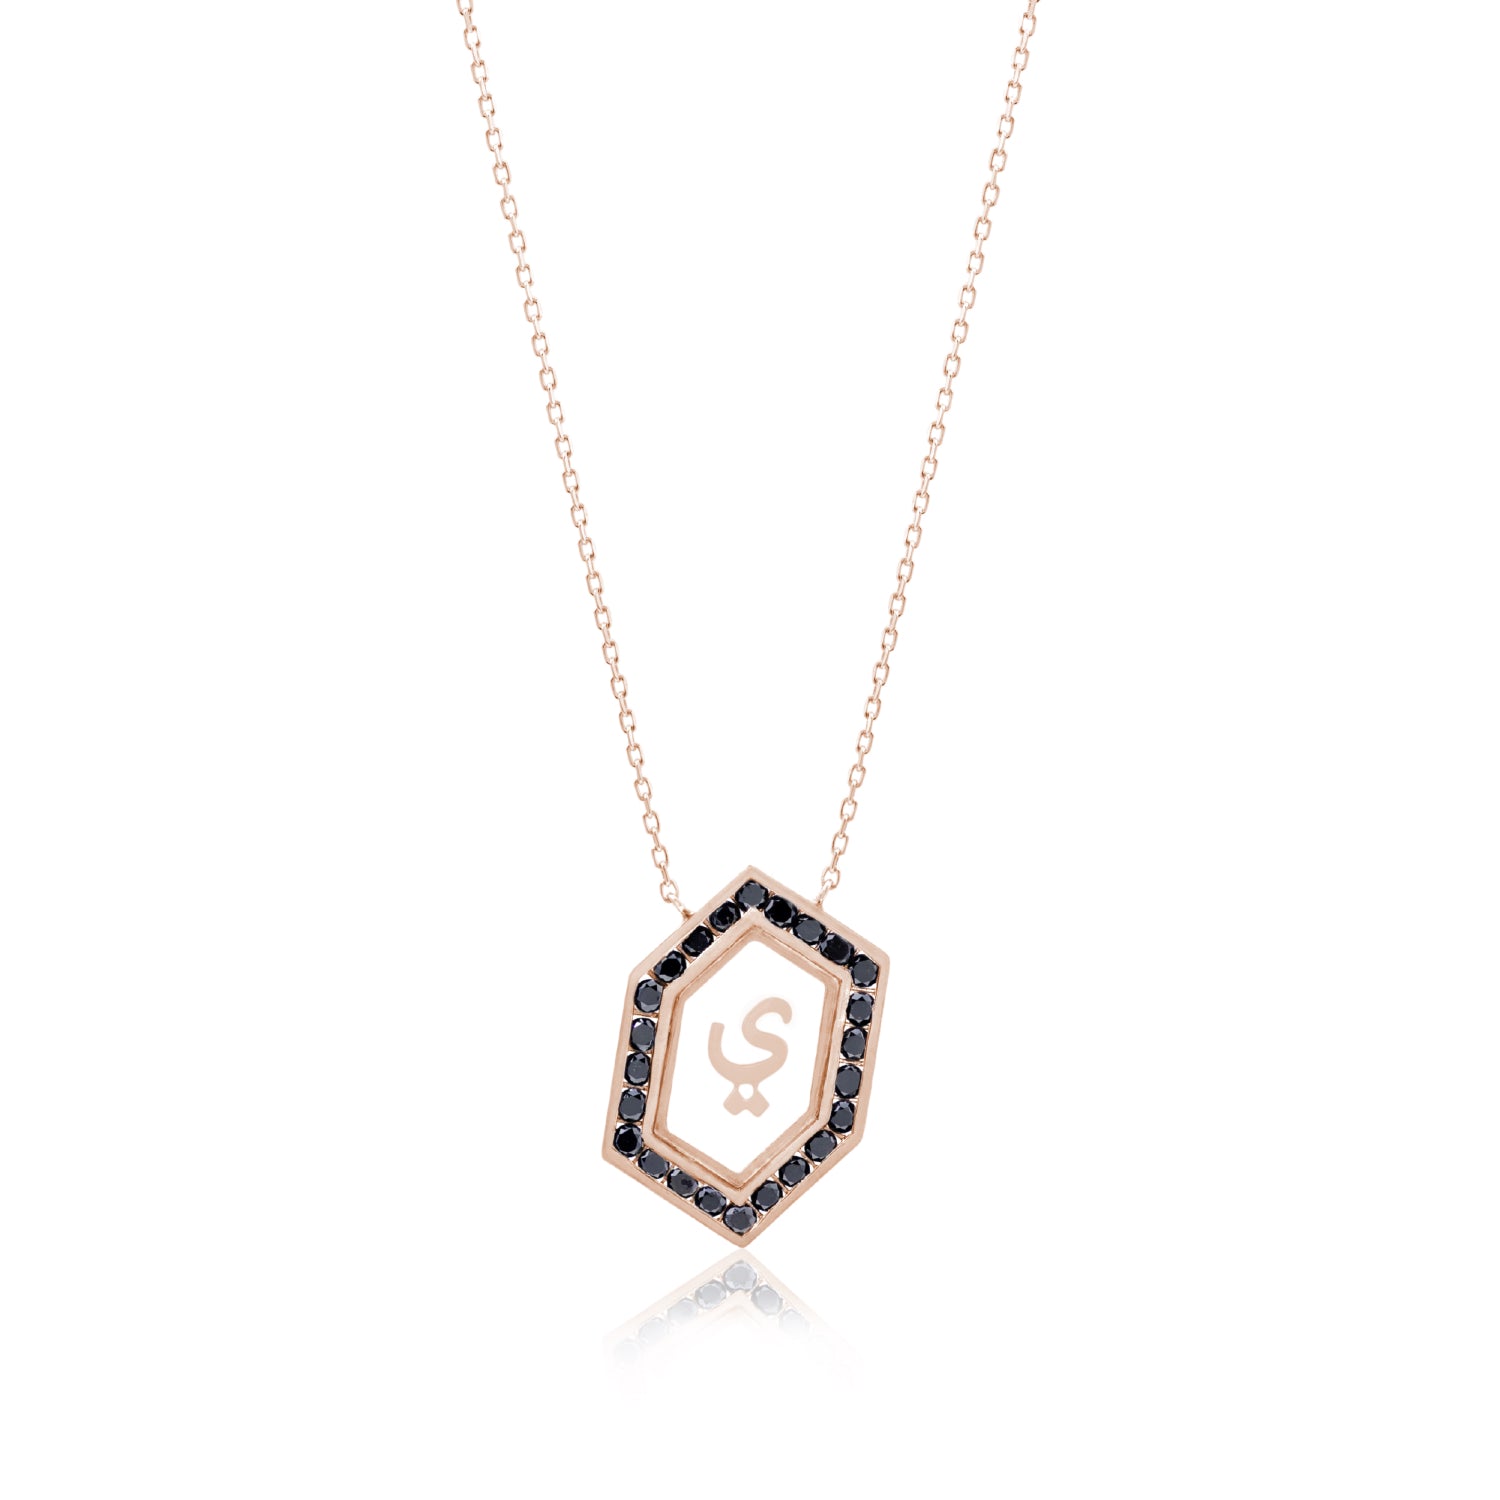 Qamoos 1.0 Letter ي Black Diamond Necklace in Rose Gold